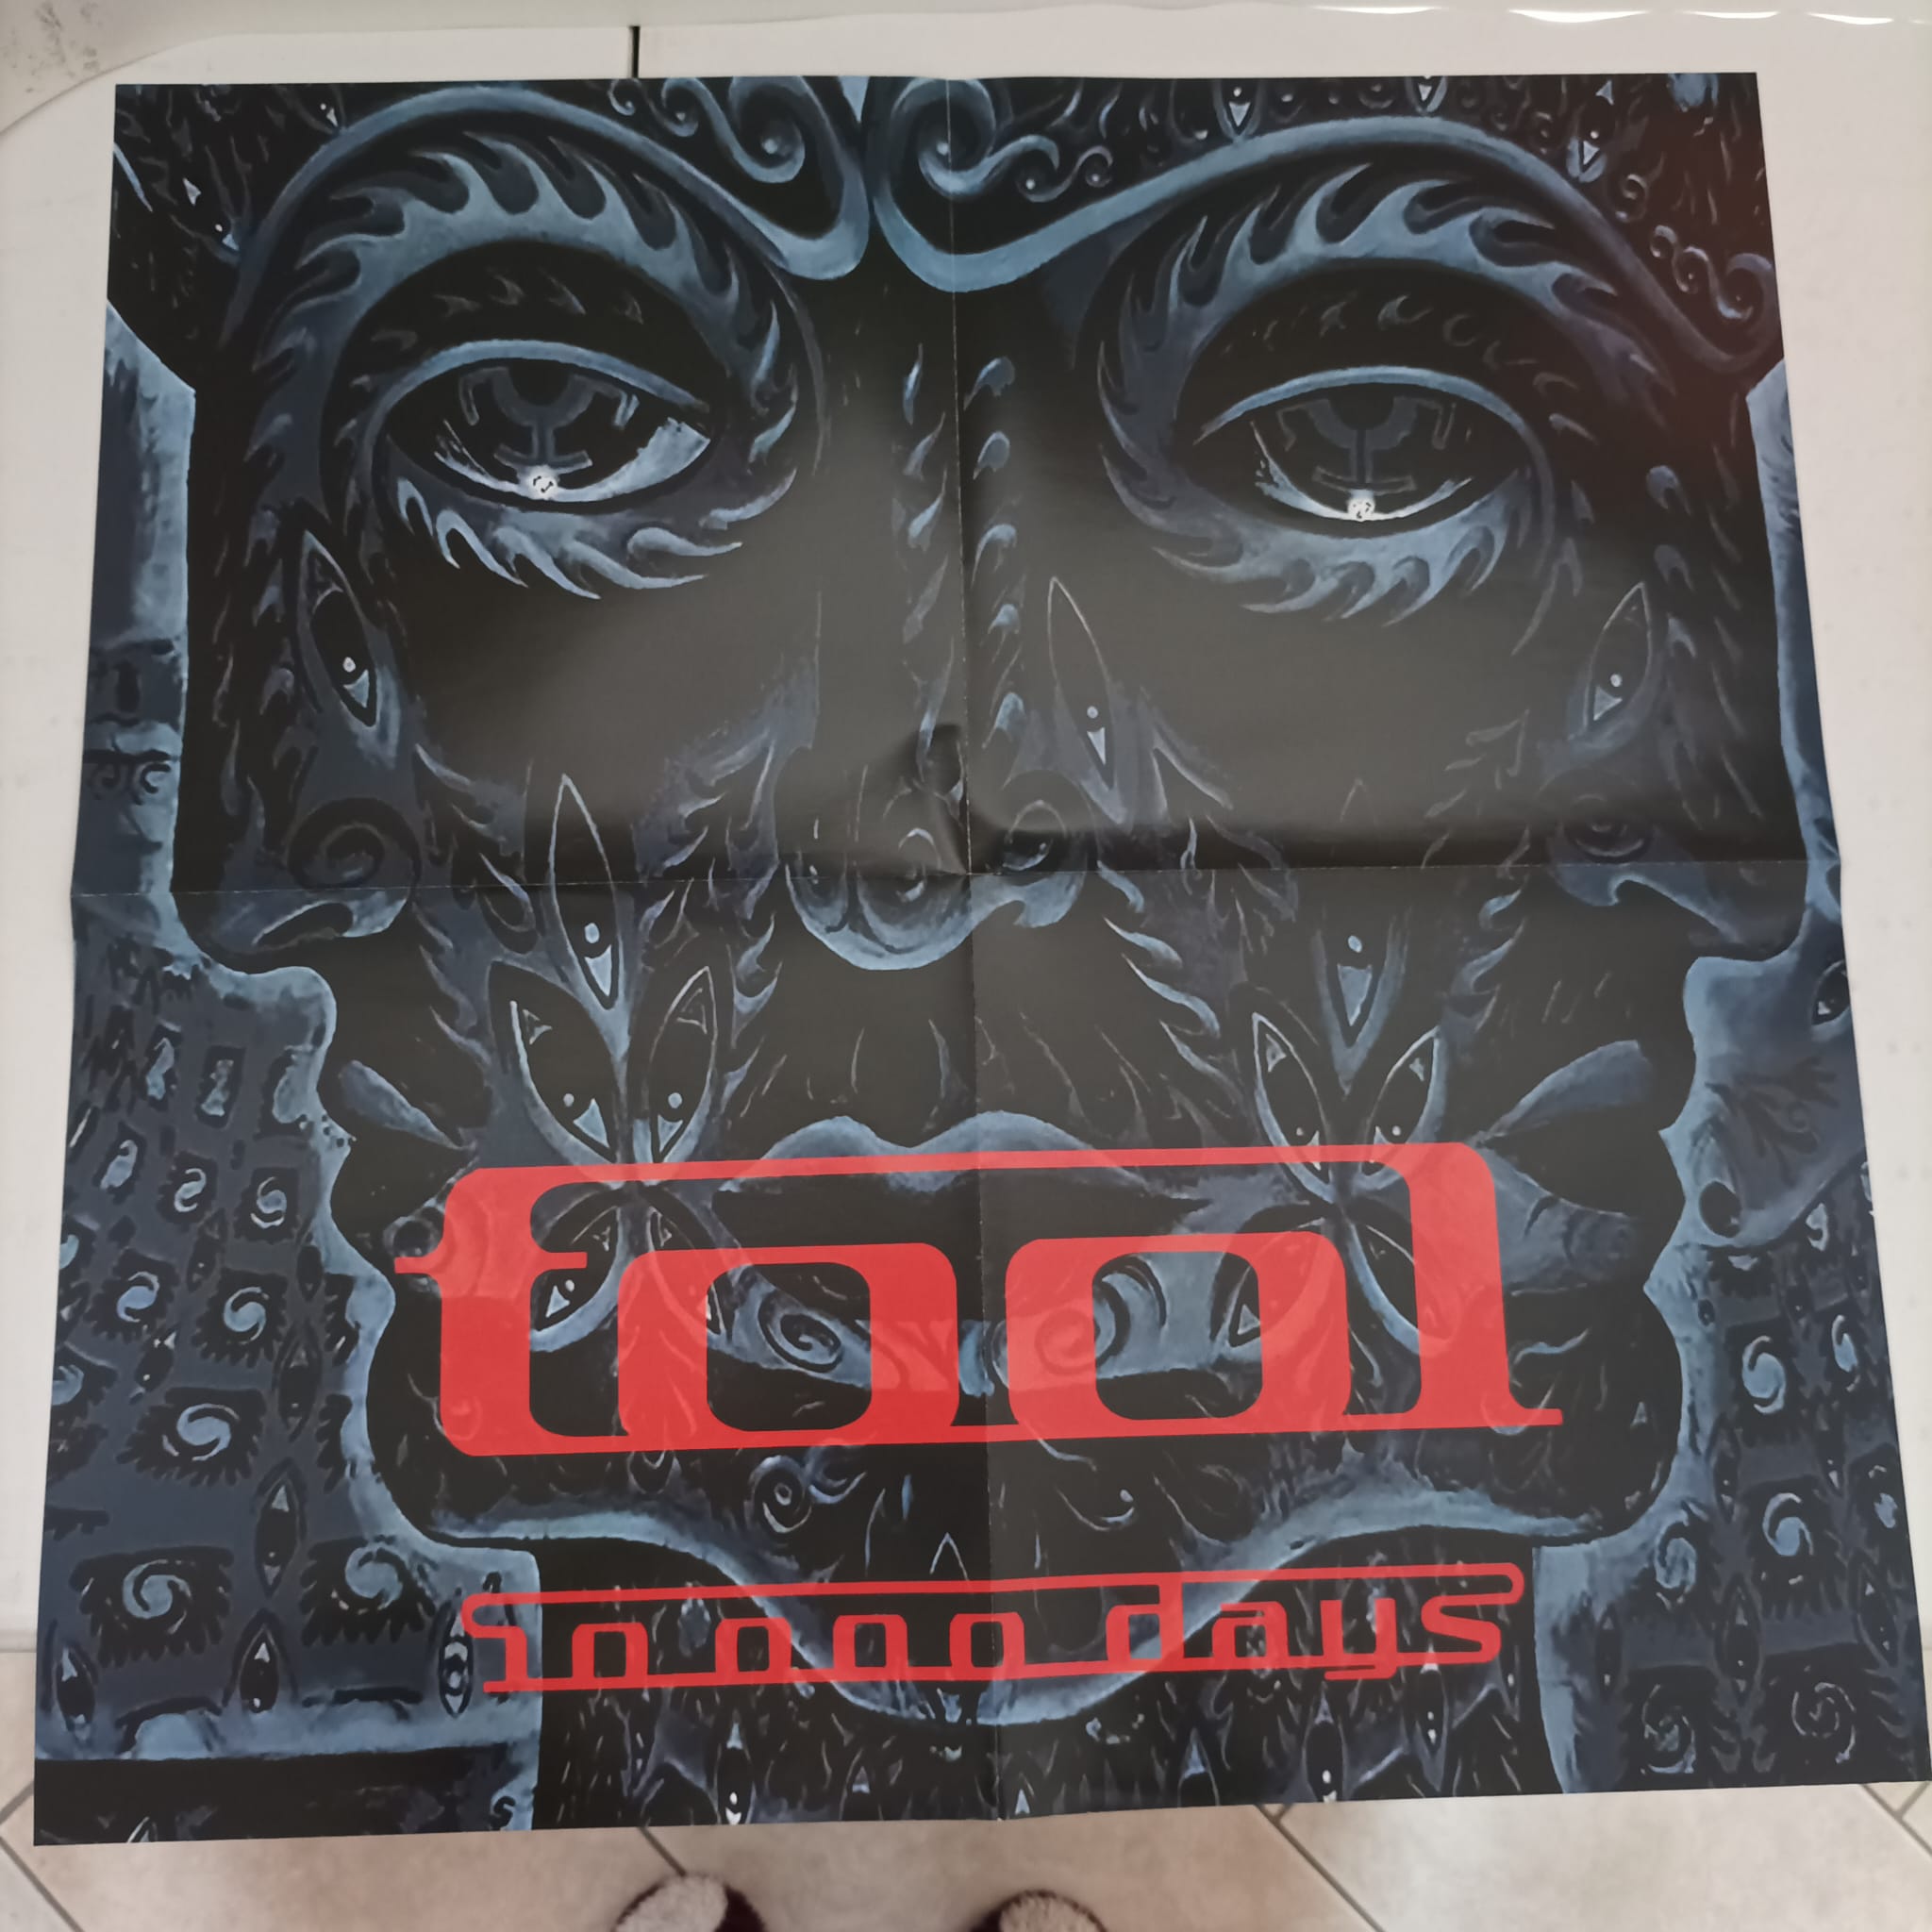 Tool – 10,000 Days - Glasses Edition - 2LP Red